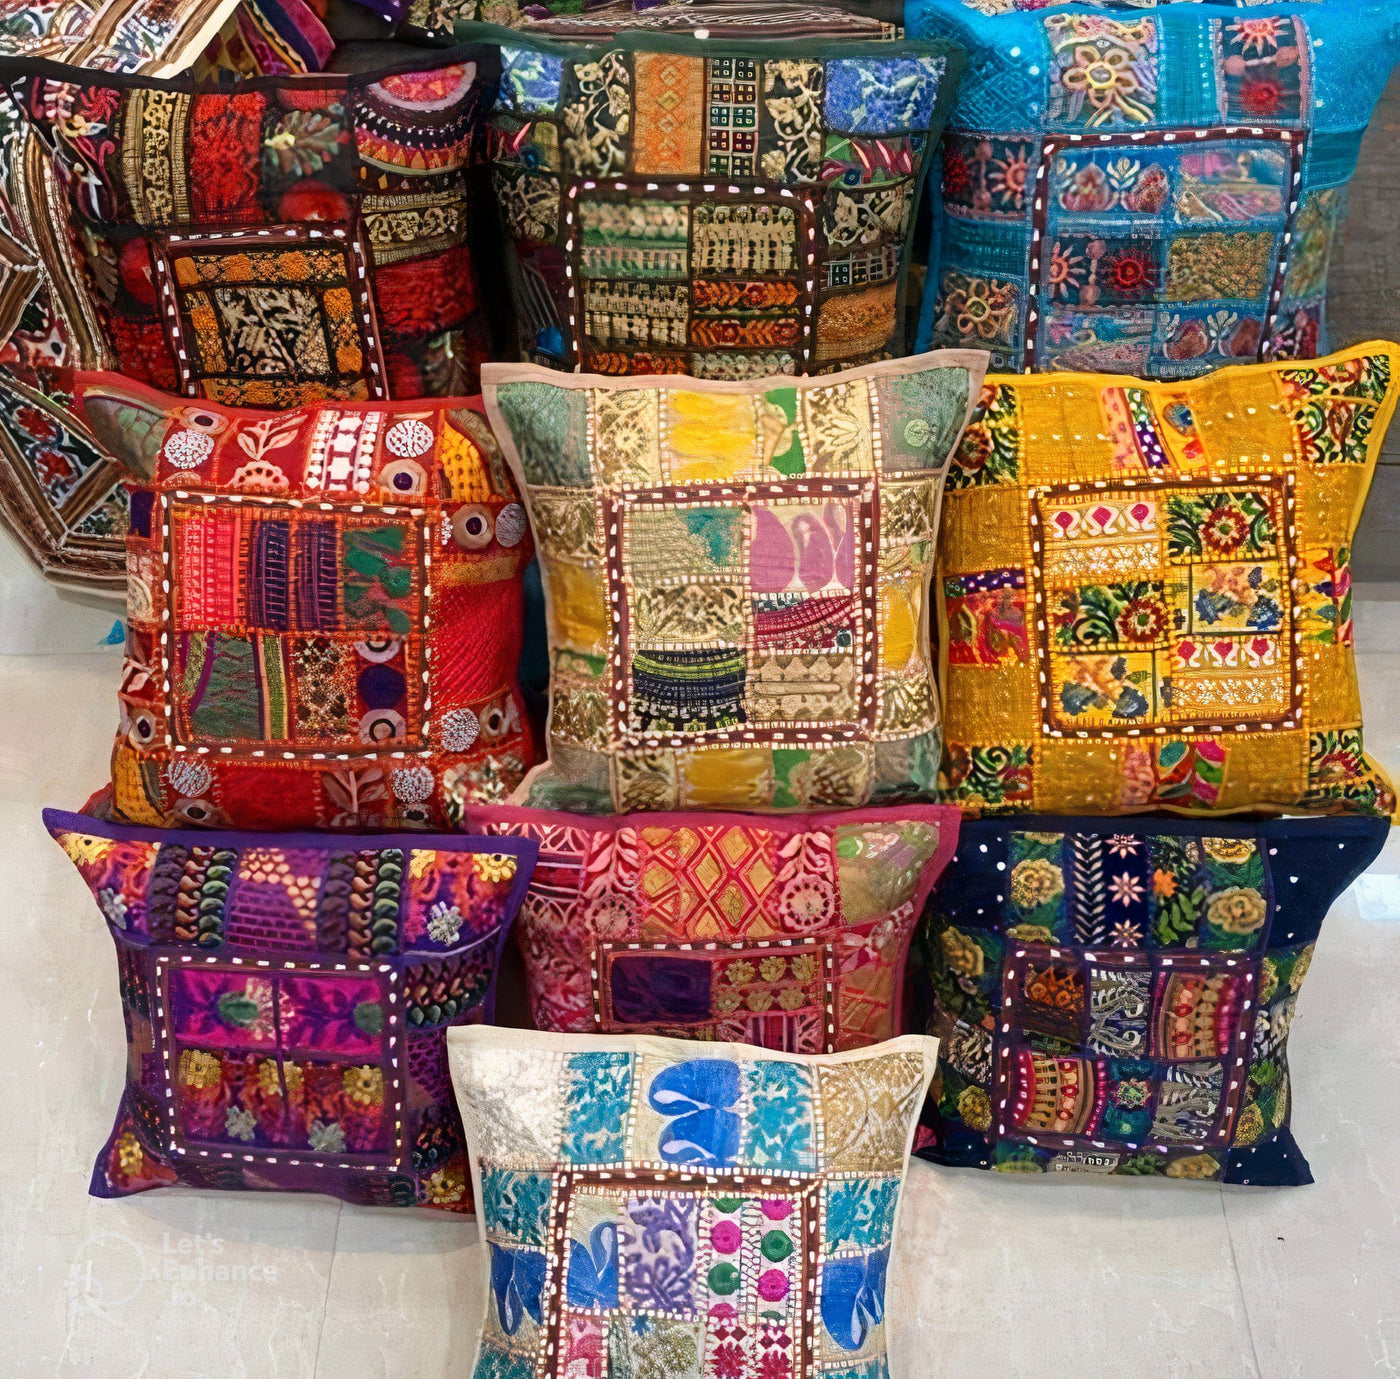 Lamansh cushion covers LAMANSH® Rajasthani Cotton Cushion Cover Embroidery Patchwork, Pillow Case Cushion Covers for Sofa Living Room 🛋️ (16x16 inch NEW COLORS ADDED)